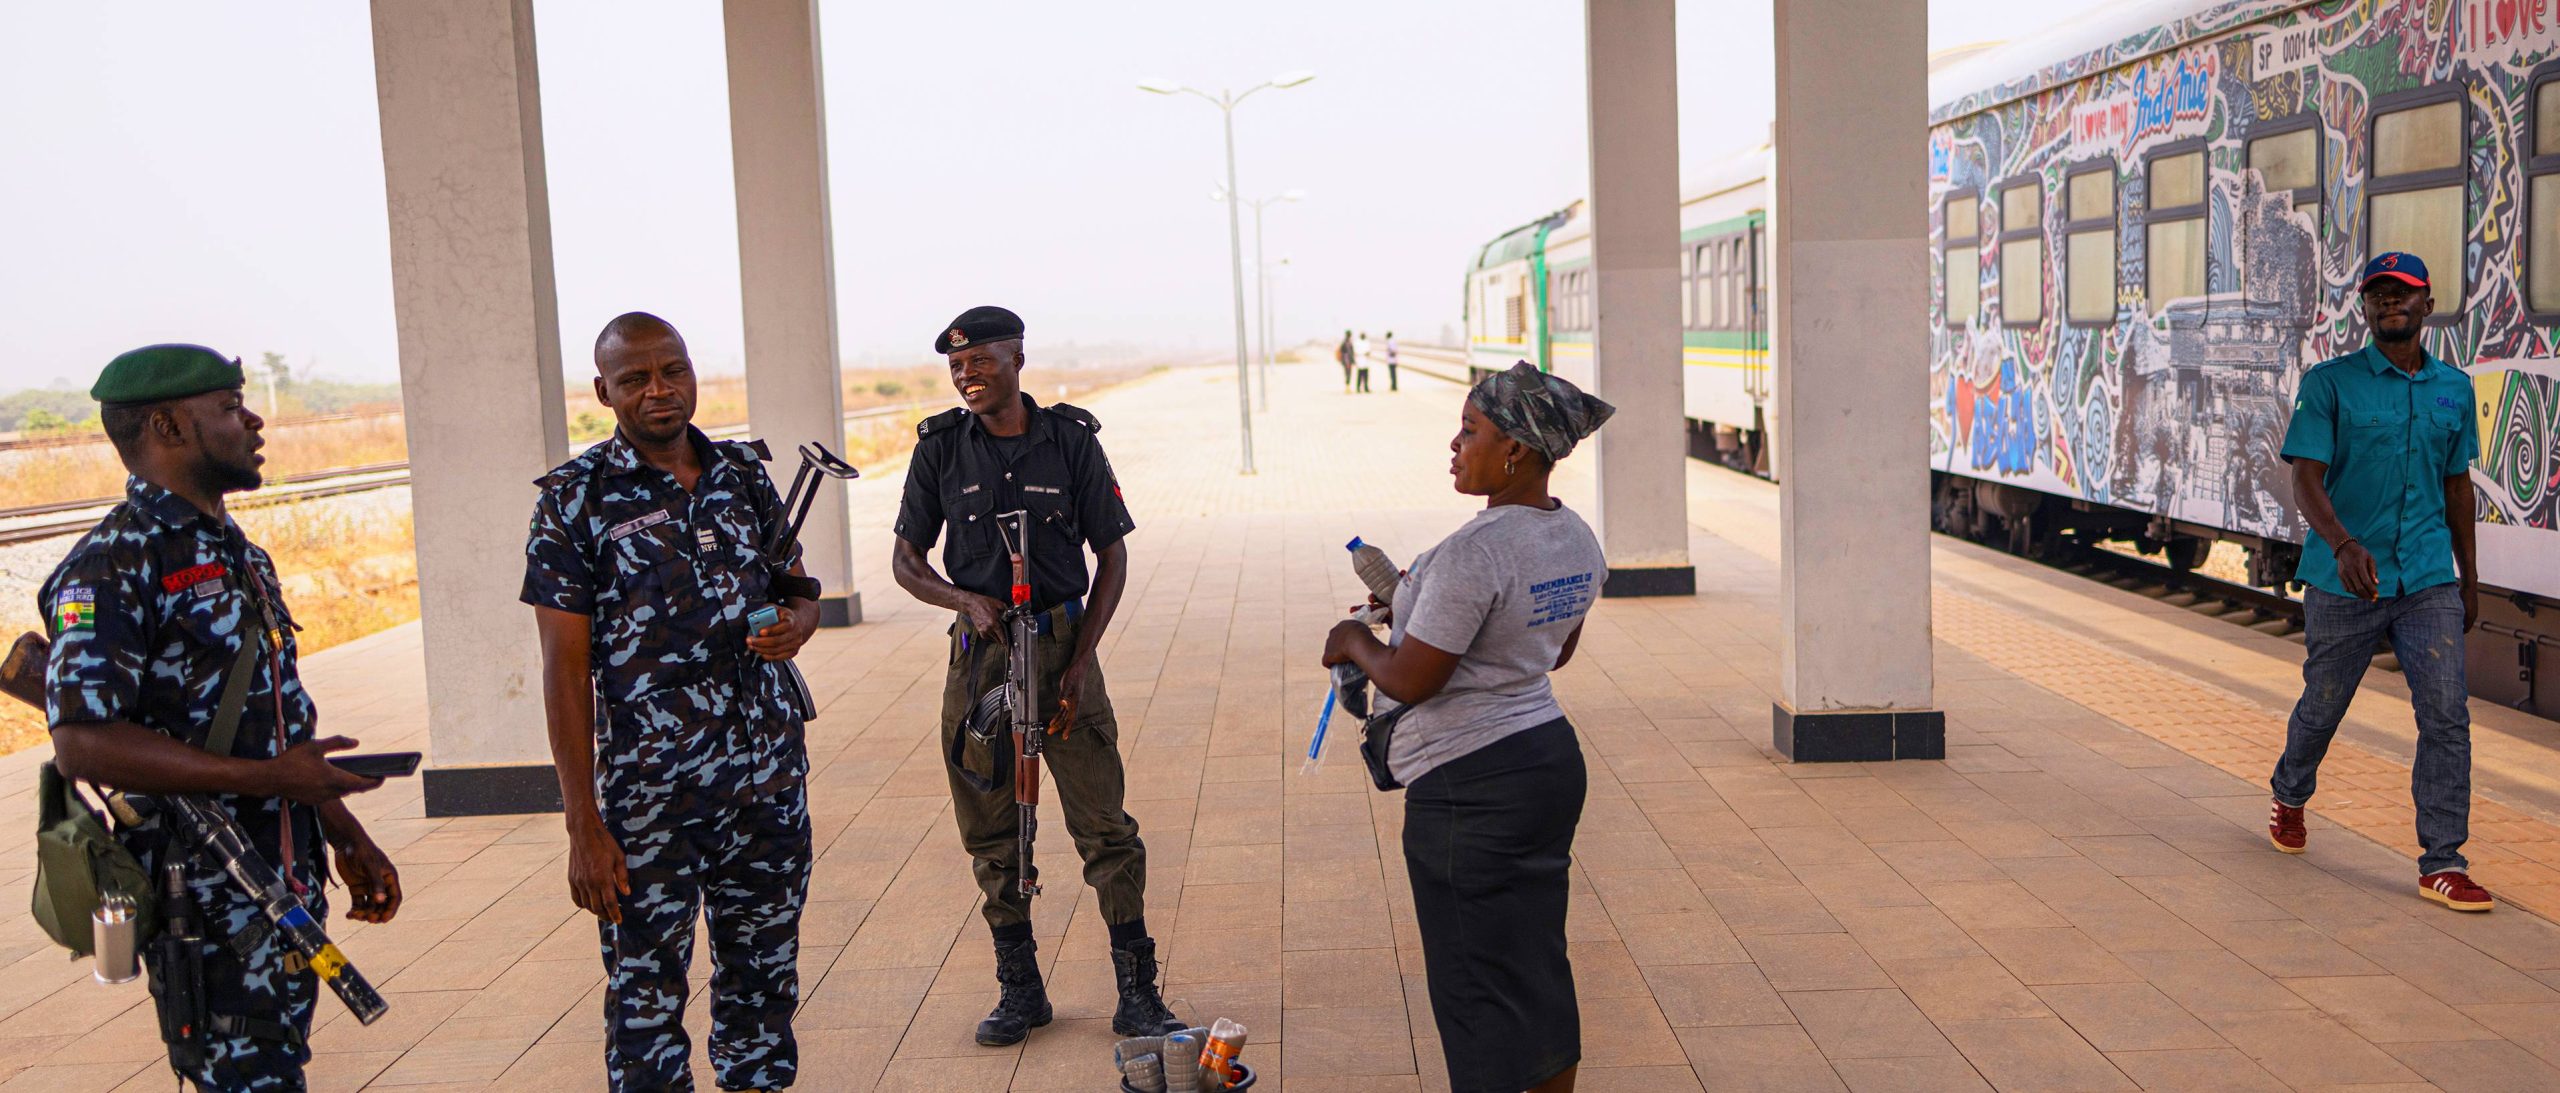 Members of the Nigerian Mobile Police (MOPOL) talking to a cleaner at the Idu Railway Station.